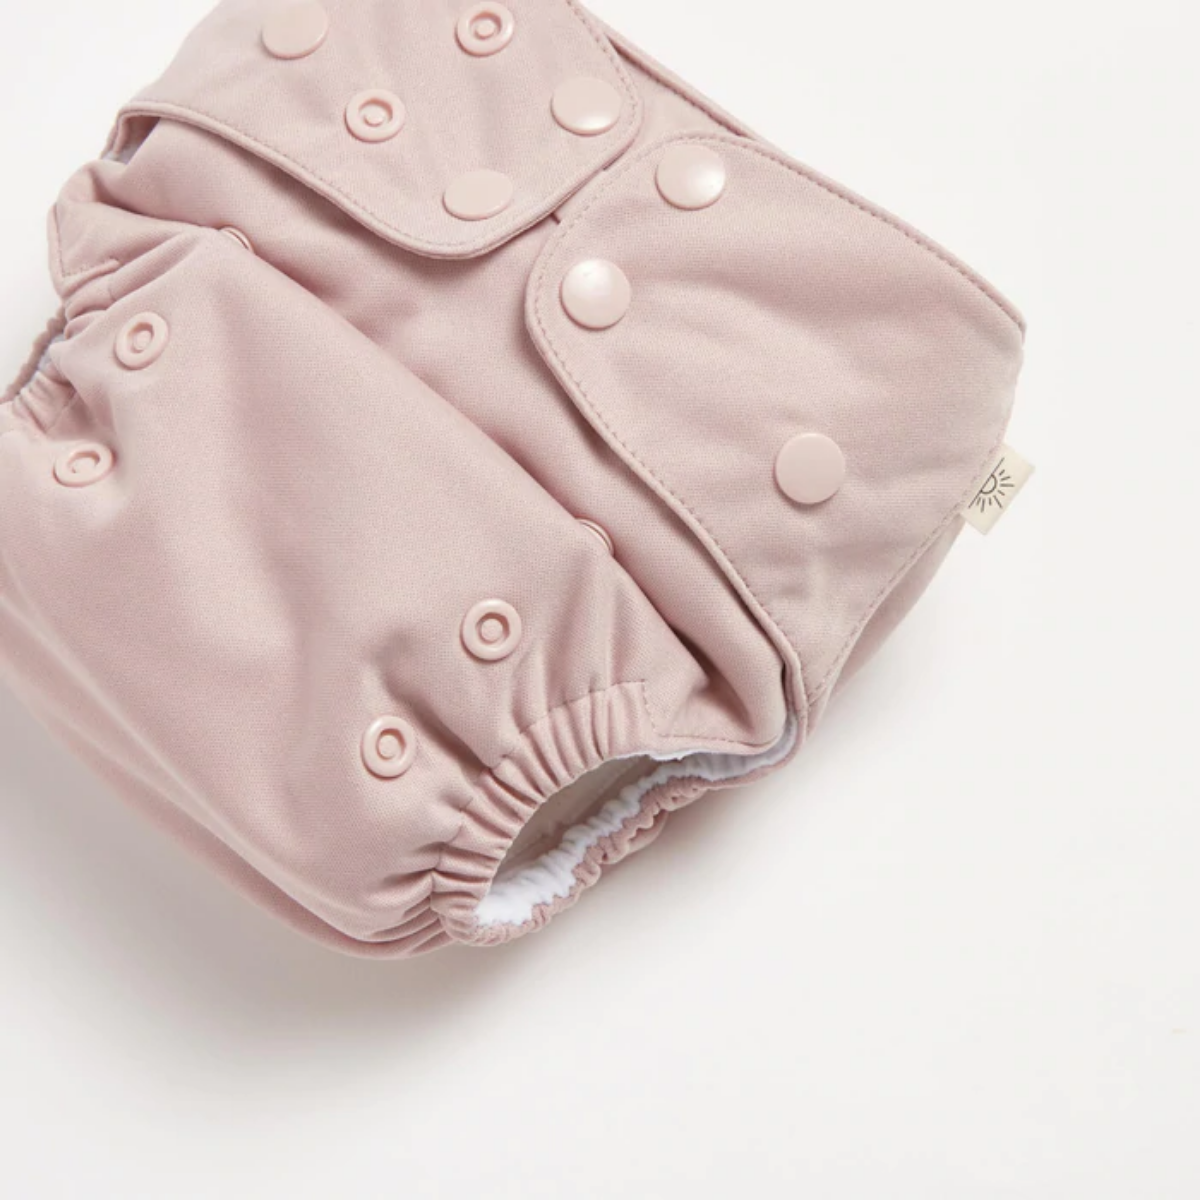 A close up of Dusty Rose 2.0 Modern Cloth Nappy by EcoNaps on a white surface.